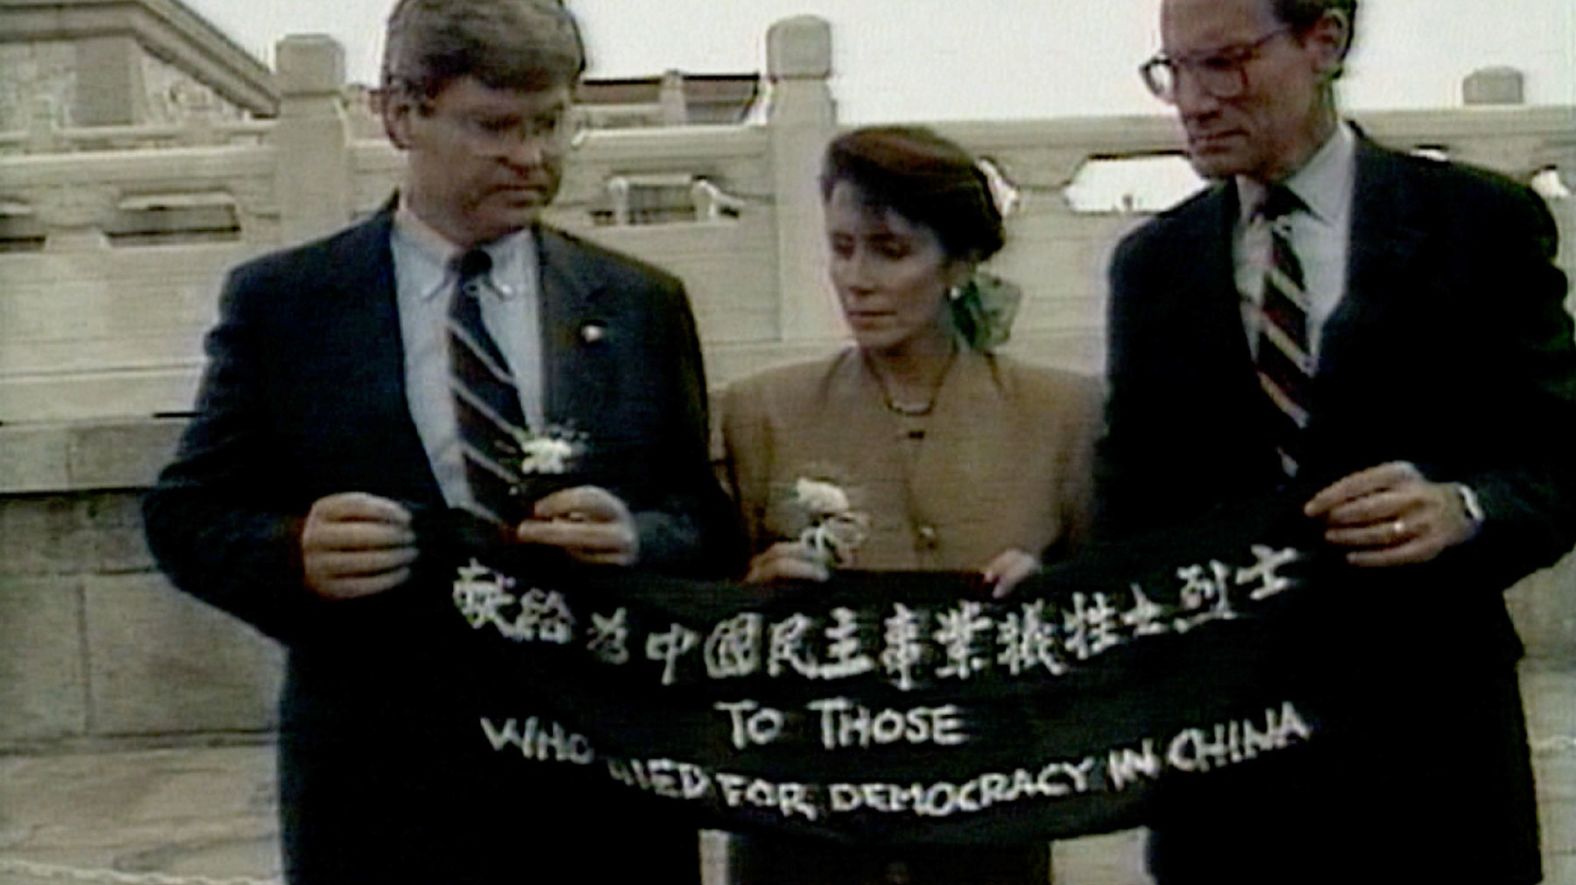 In this image taken from video, Pelosi and fellow US Reps. Ben Jones, left, and John Miller unfold a banner during a trip to Beijing in September 1991. The banner says, "To those who died for democracy in China."